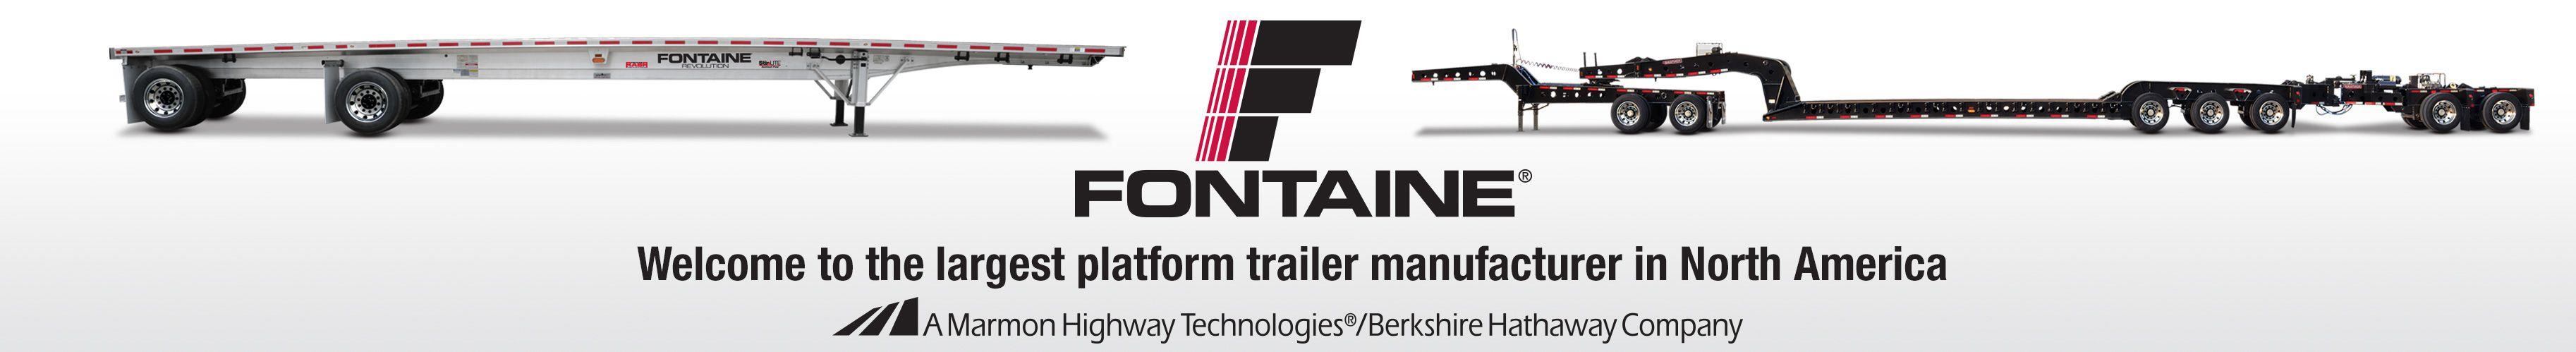 Trailers Logo - Fontaine Trailer, Flatbed Trailers, Flat bed trailers, Trailer Drops ...